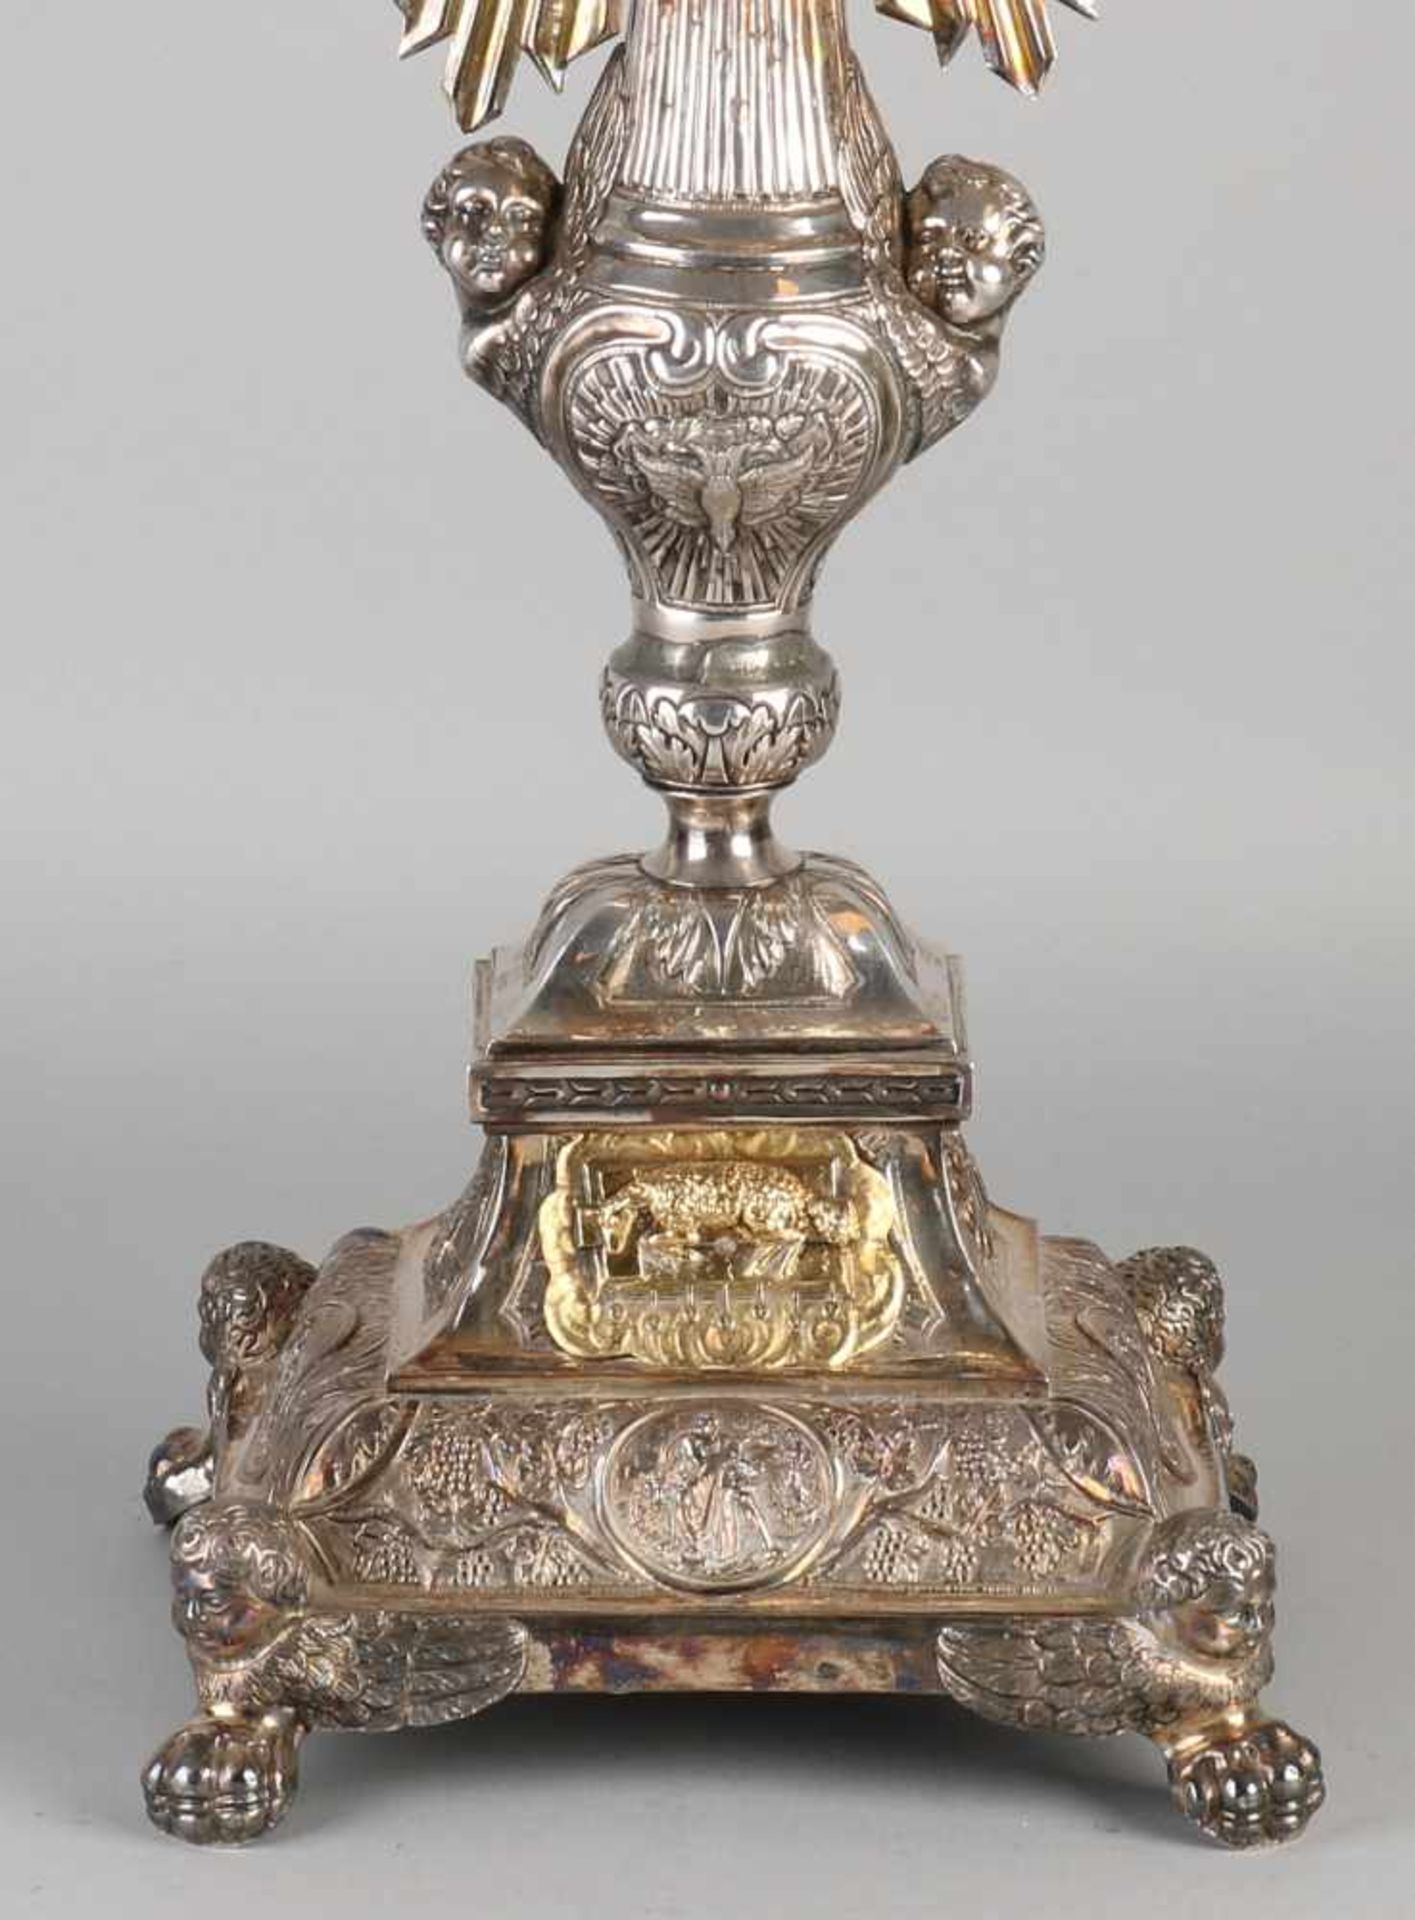 Unique silver monstrance, 950/000, Baroque, decorated with a seeing eye, cherubs, acanthus leaves - Bild 2 aus 3